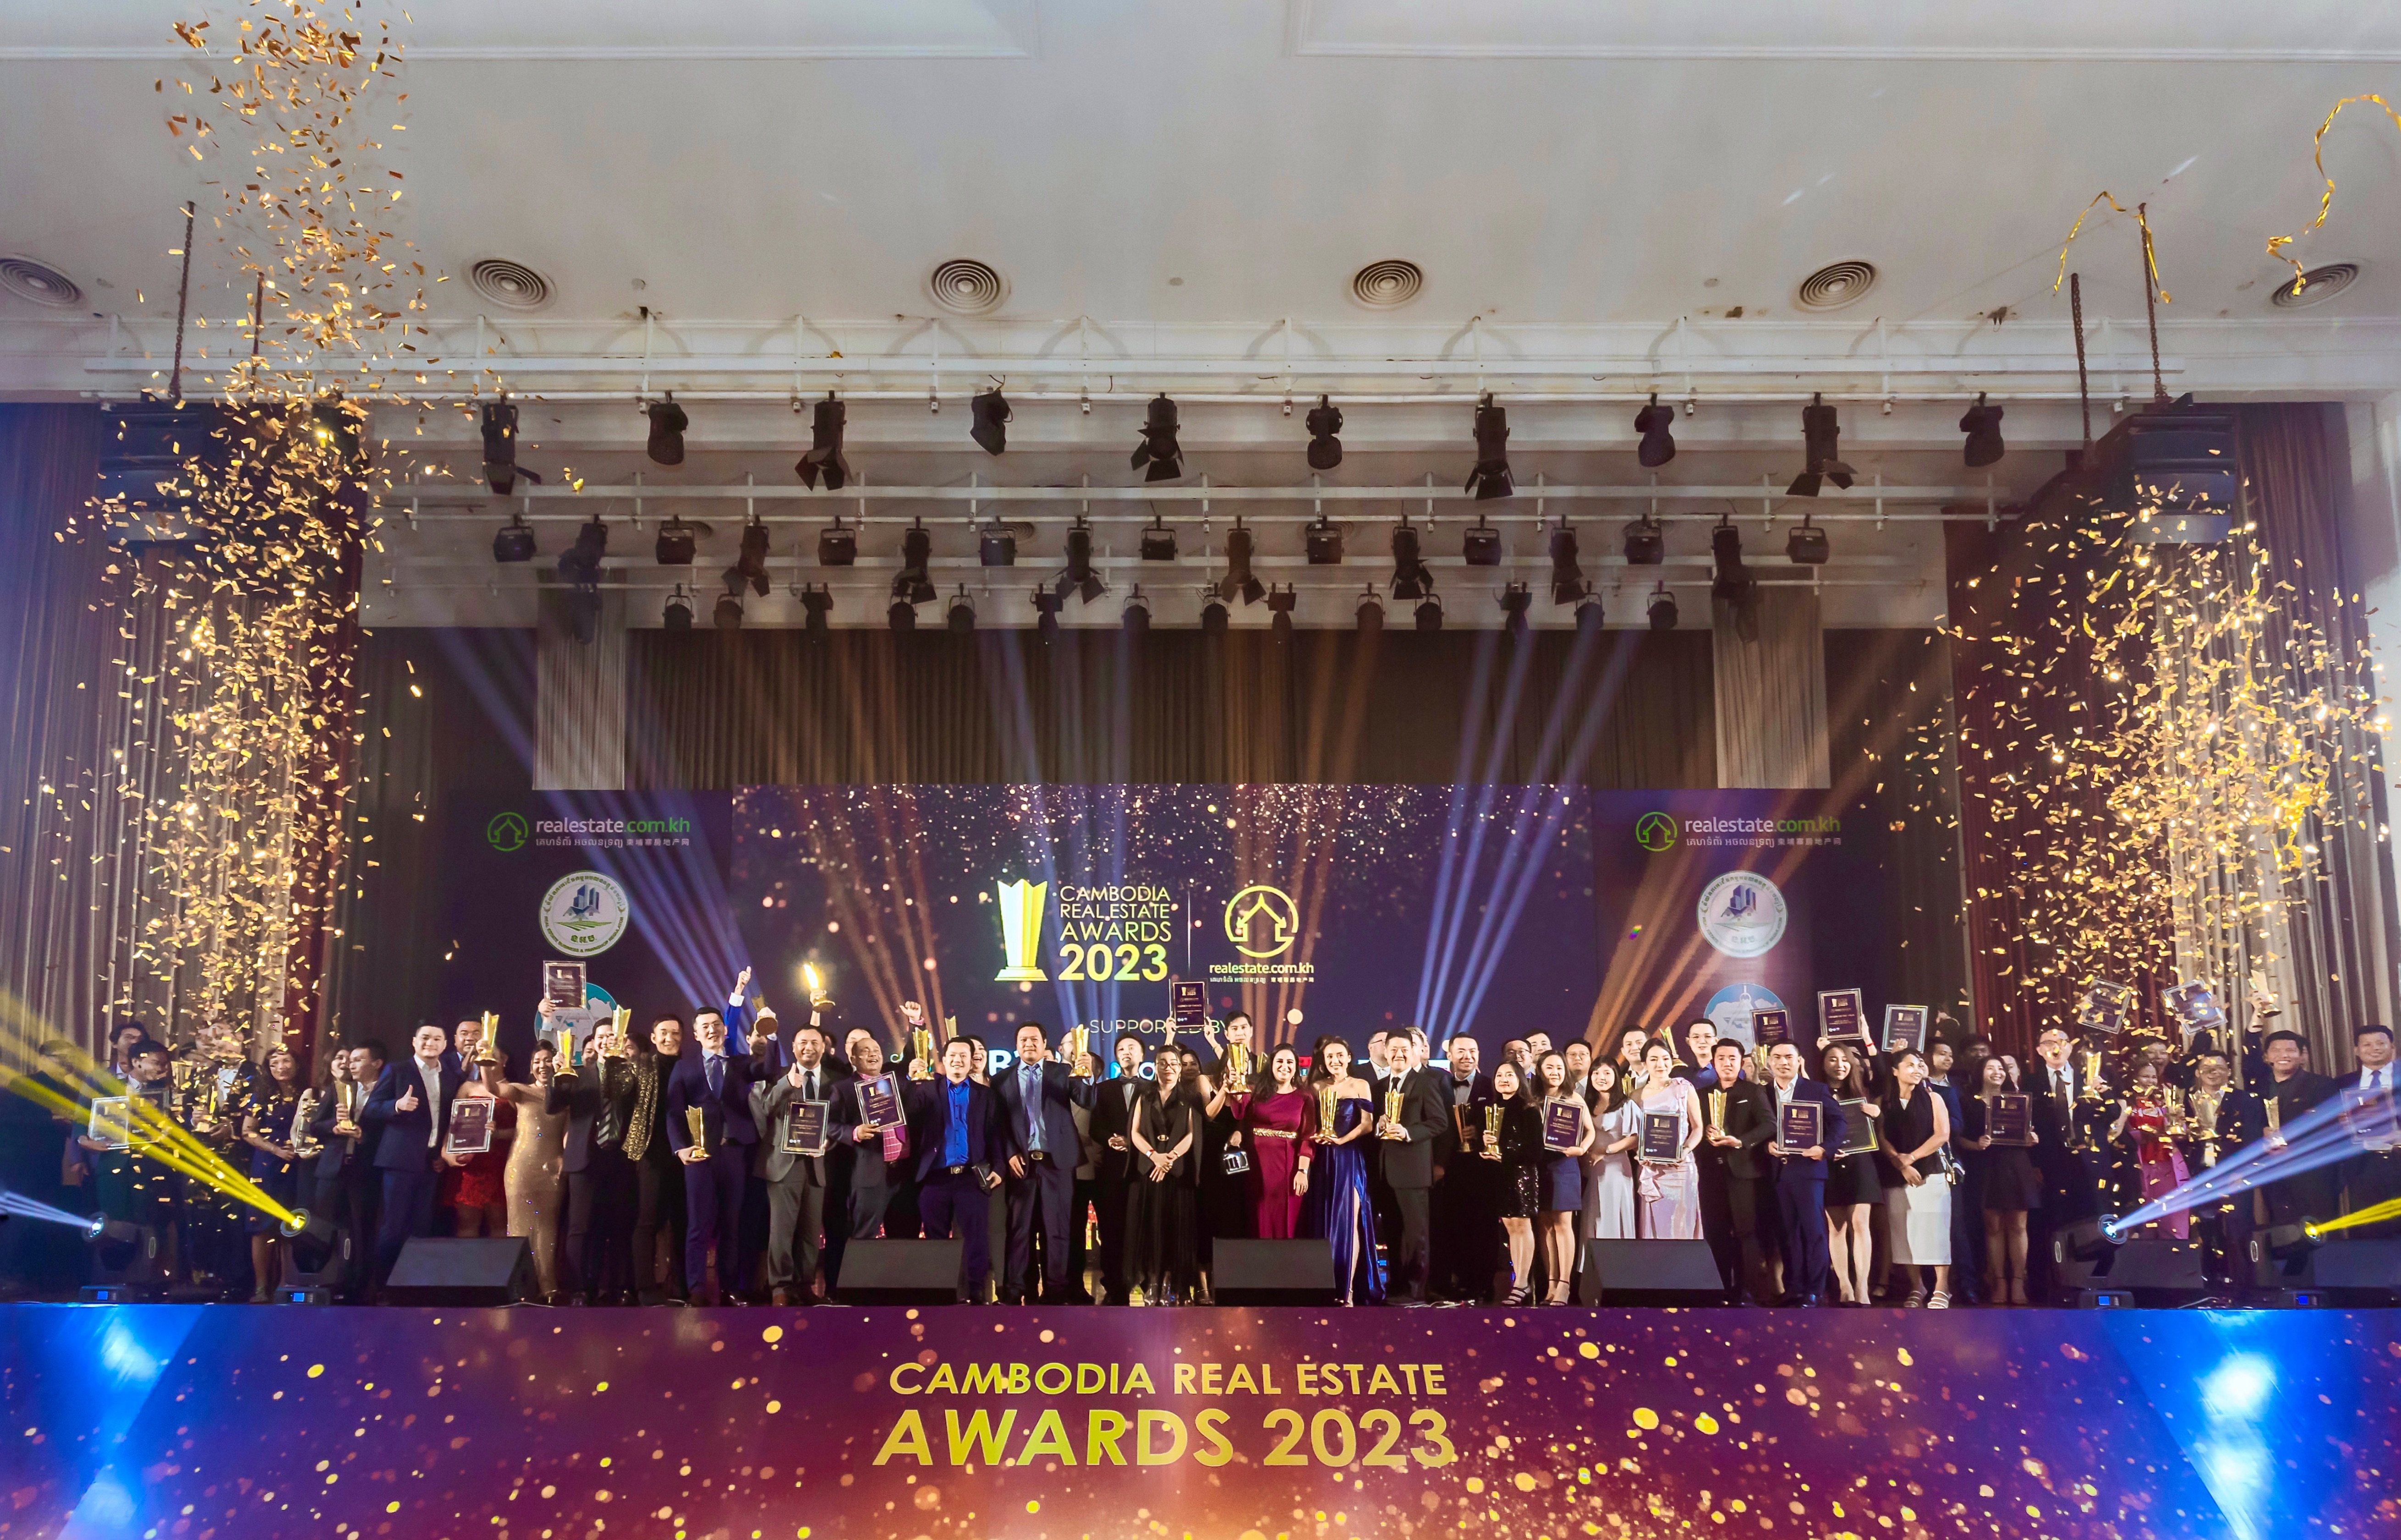 Cambodia Real Estate Awards 2023: Celebrating Excellence in the Industry at Sofitel Hotel